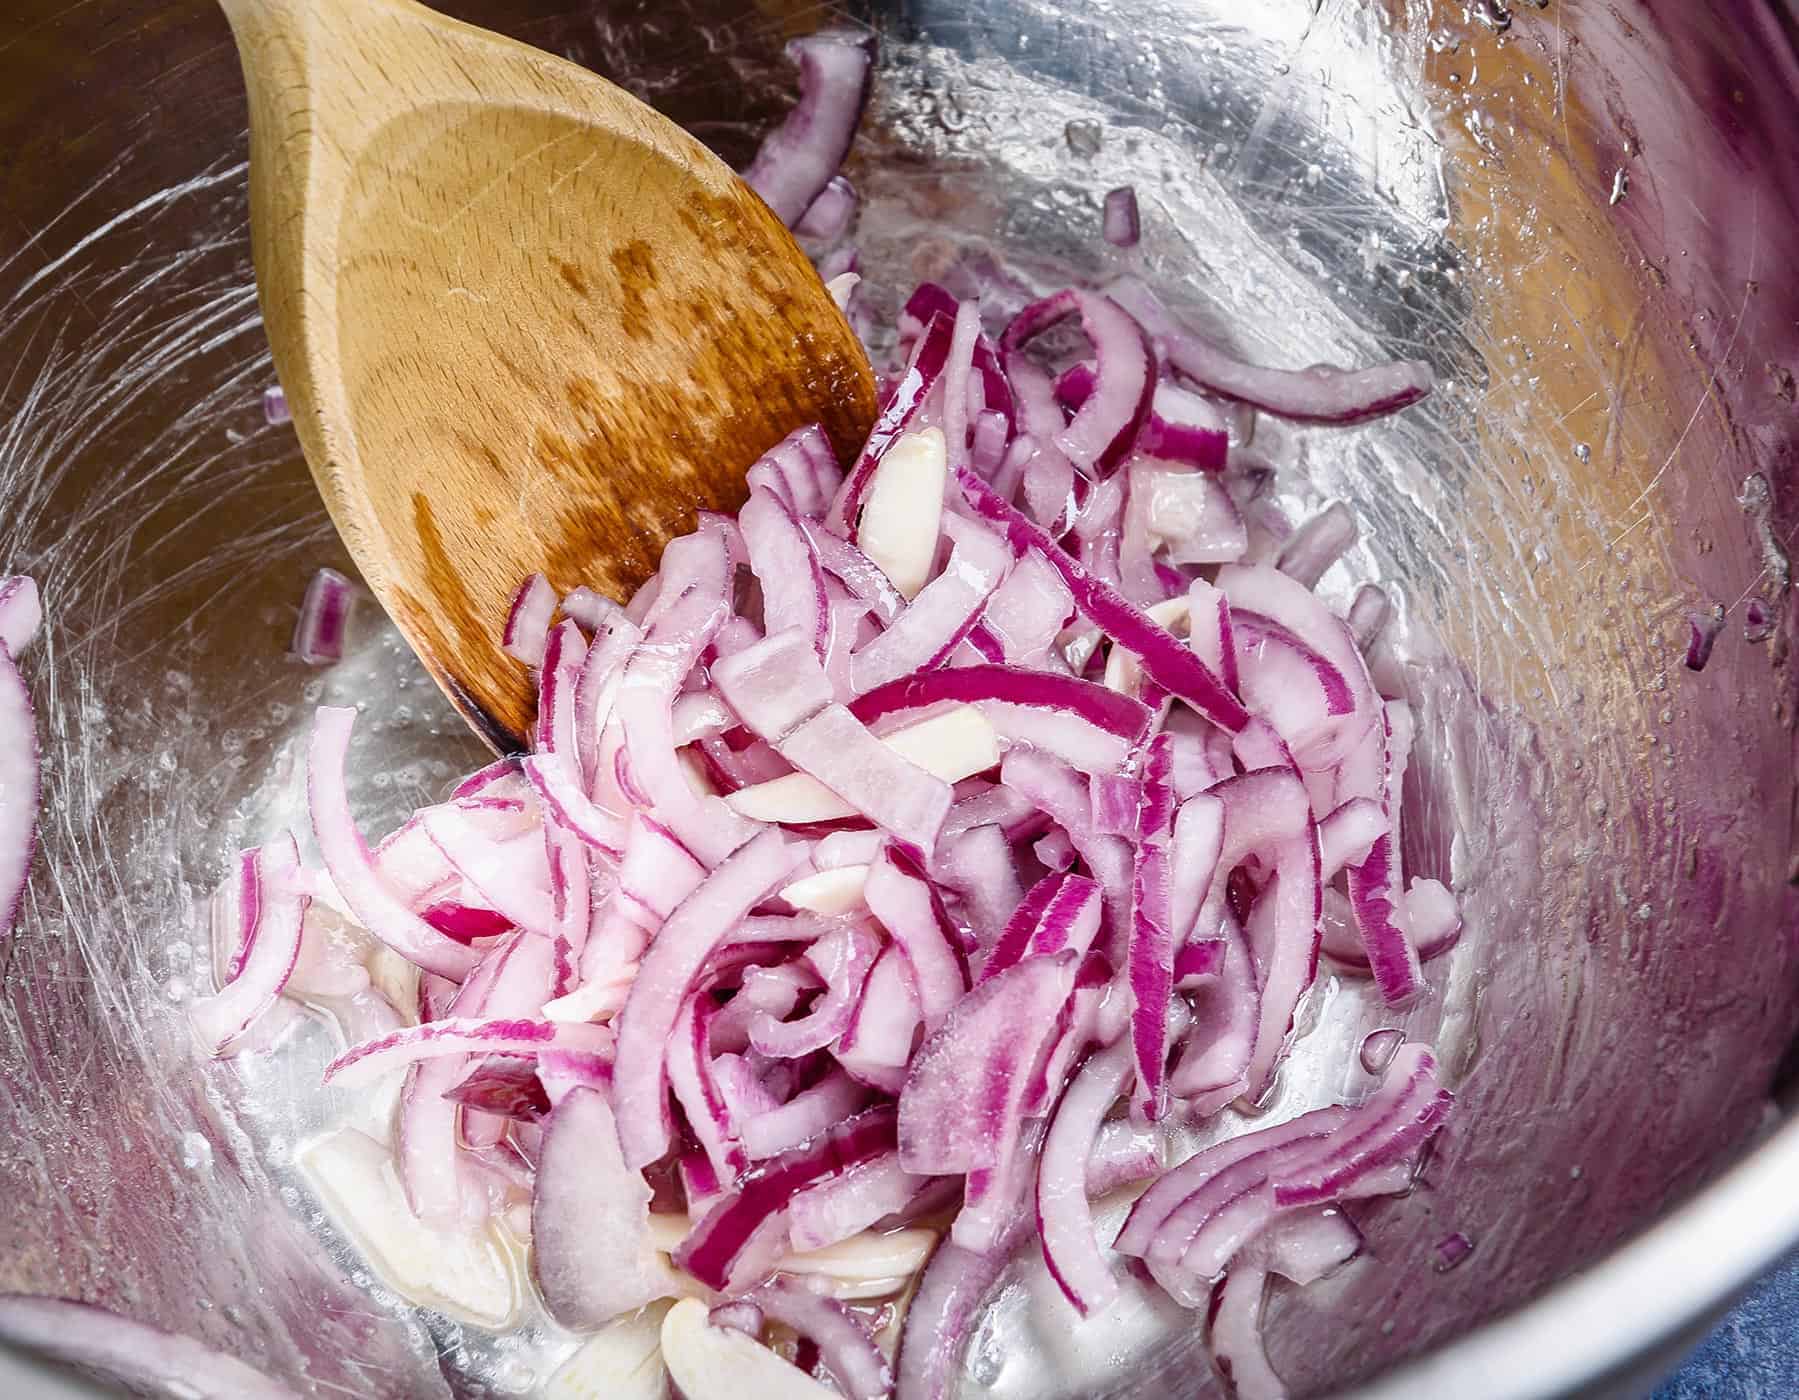 Mixing the onion and garlic in oil